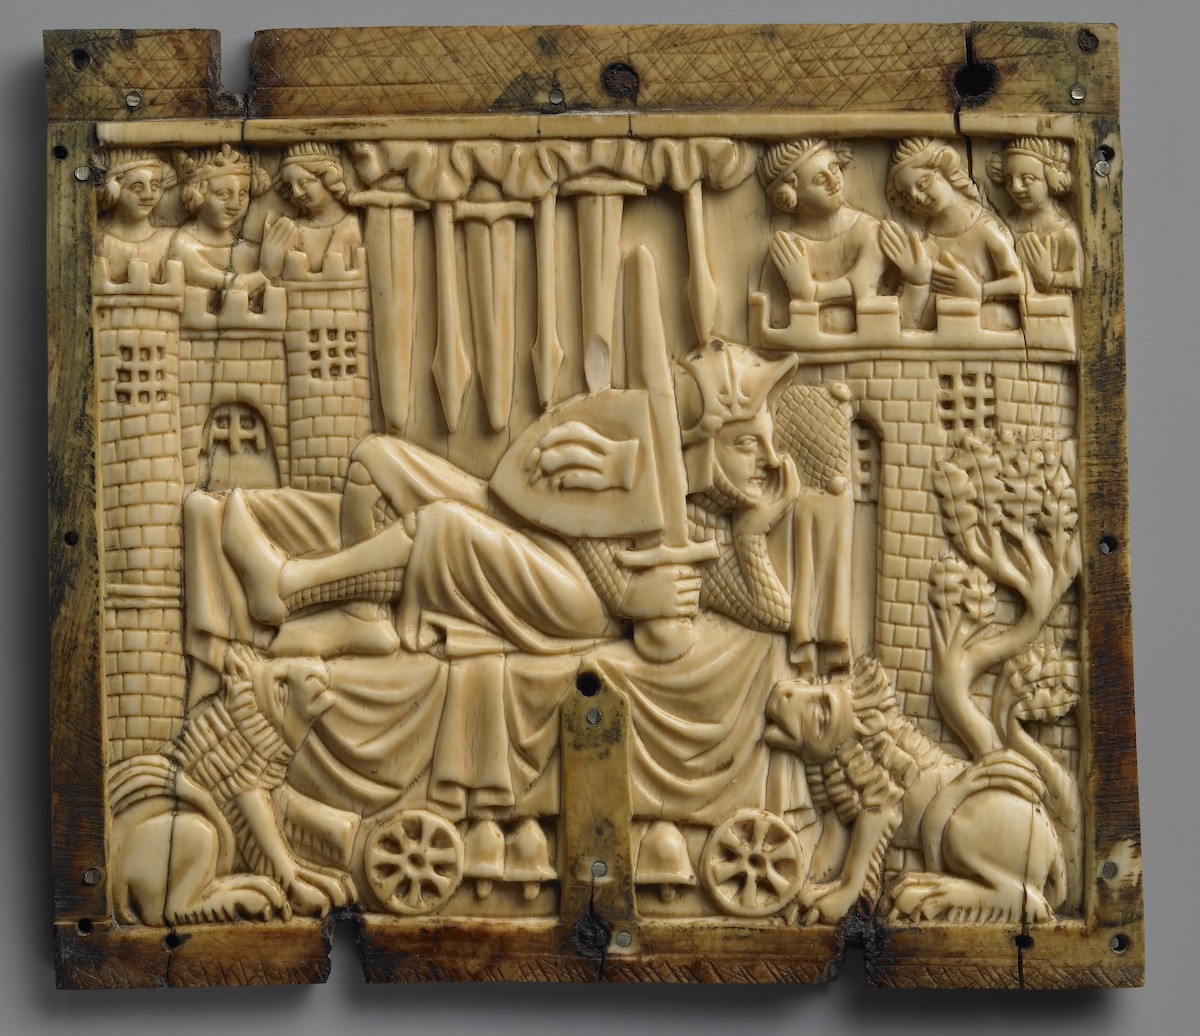 A squarish ivory panel carved with the scene of a man, wearing a helmet and full armor, reclining on a wheeled bed with bells, beneath swords and spears falling from sky, and between two lions and castle towers with female figures on each top. Border with yellowing, hatching, and some cracks with loss.